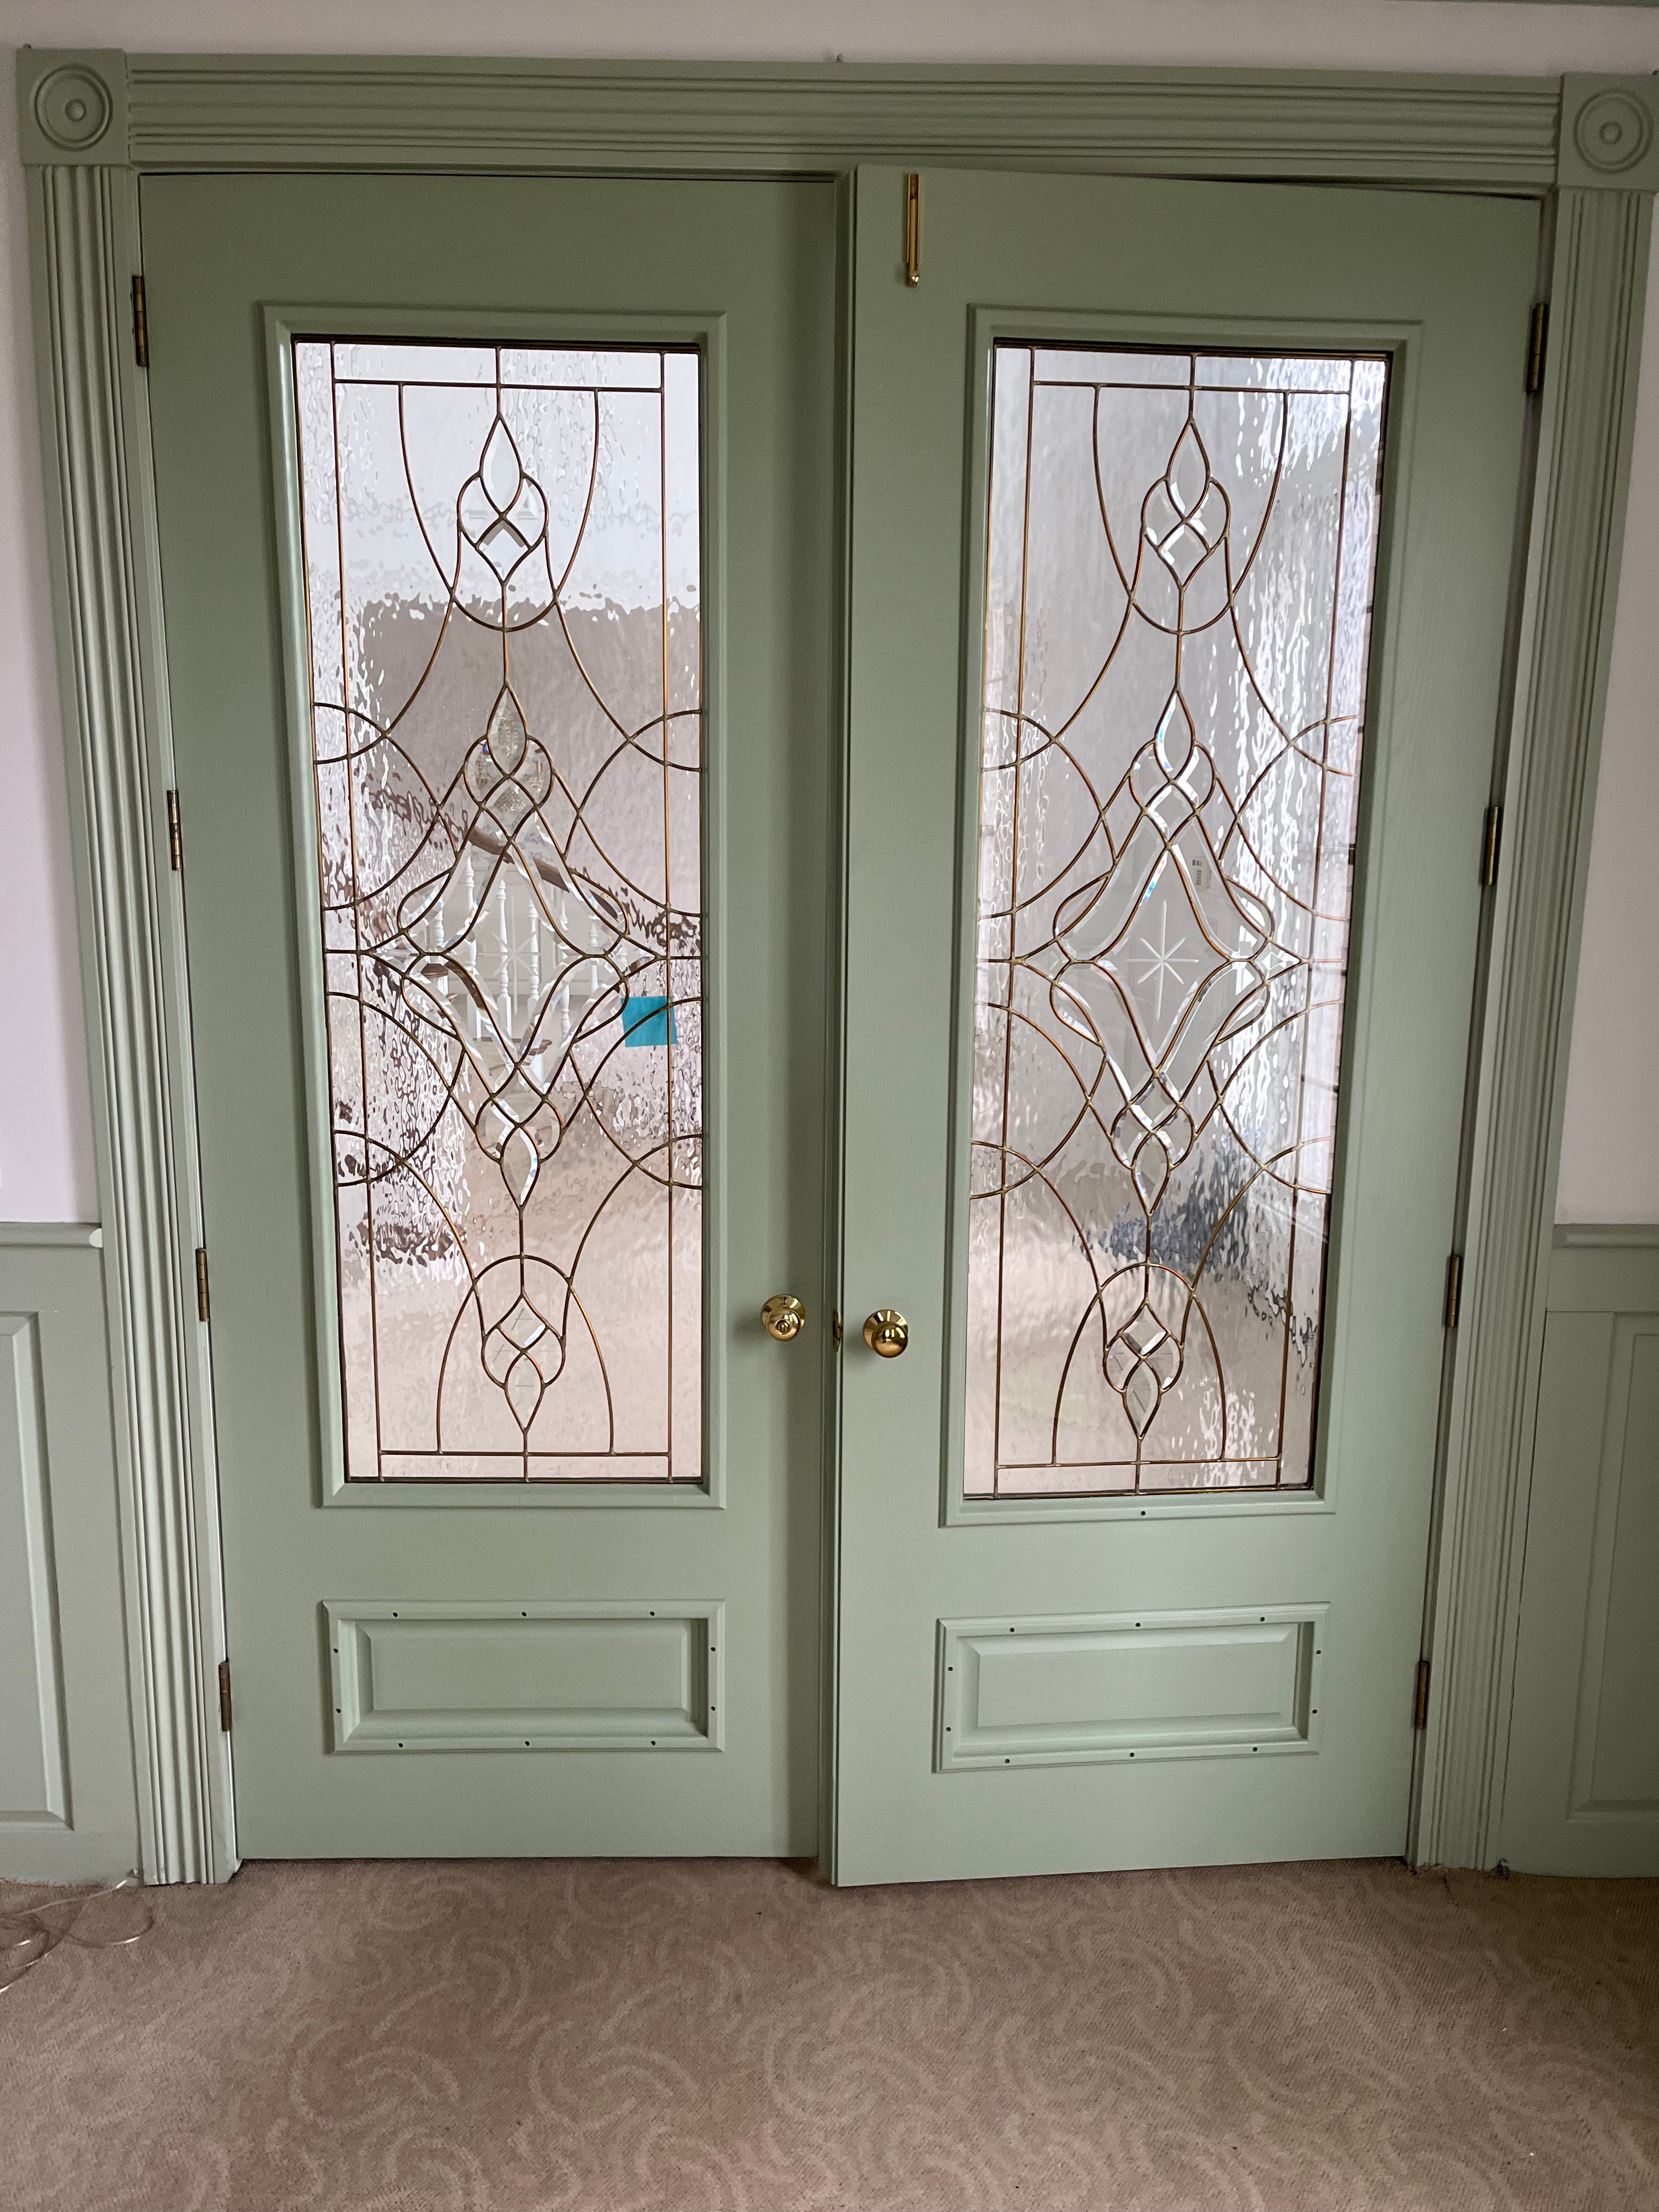 Newer (25 Year Old) French Entry Doors